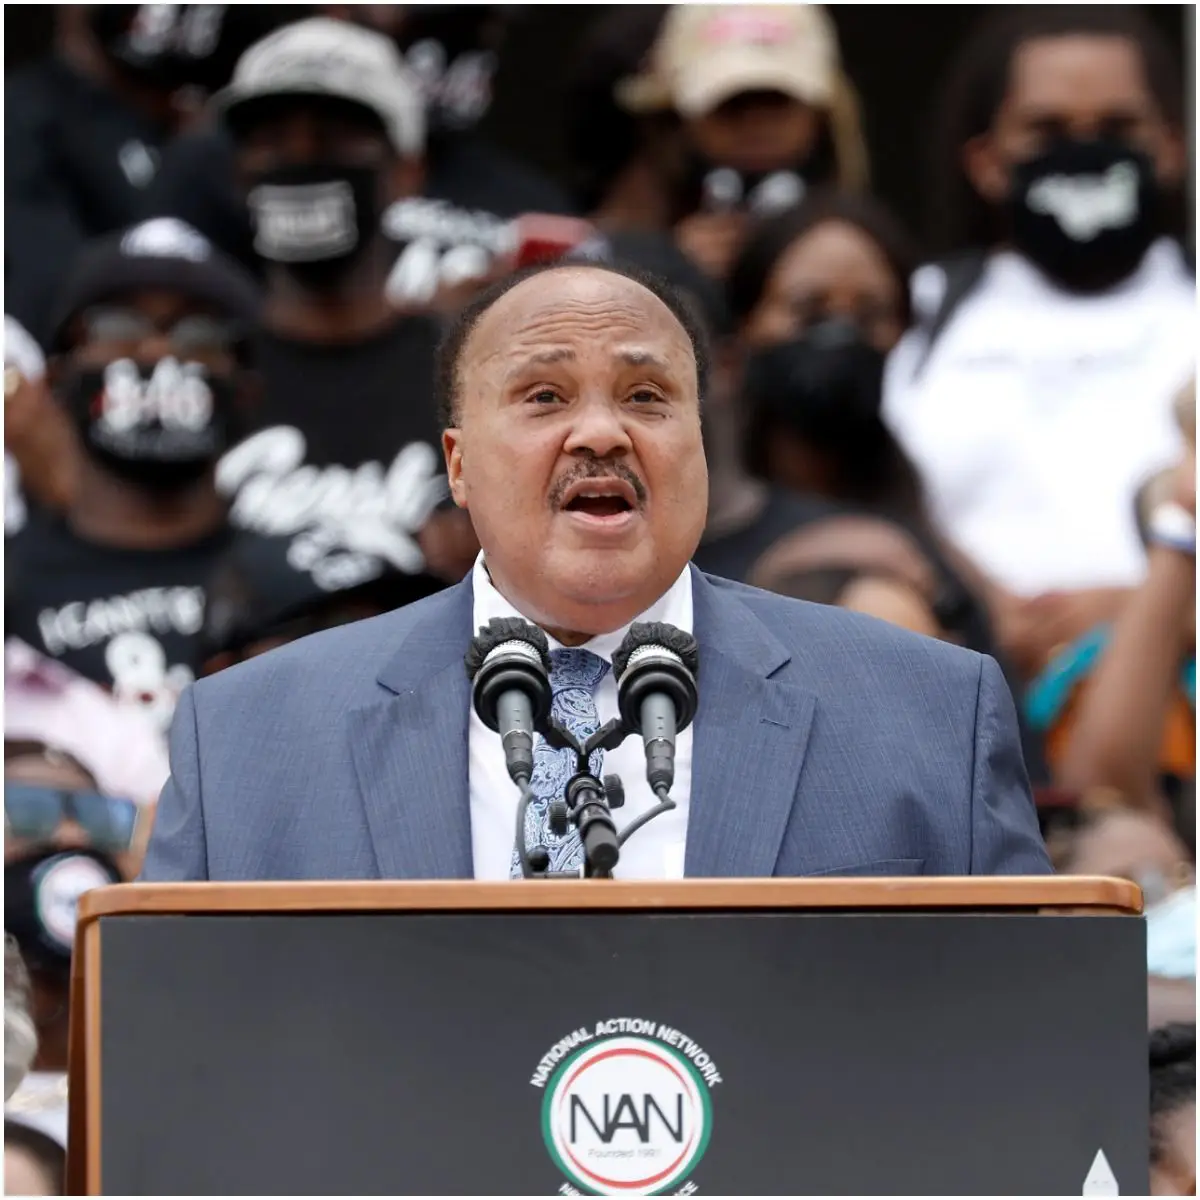 what is the net worth of Martin Luther King III